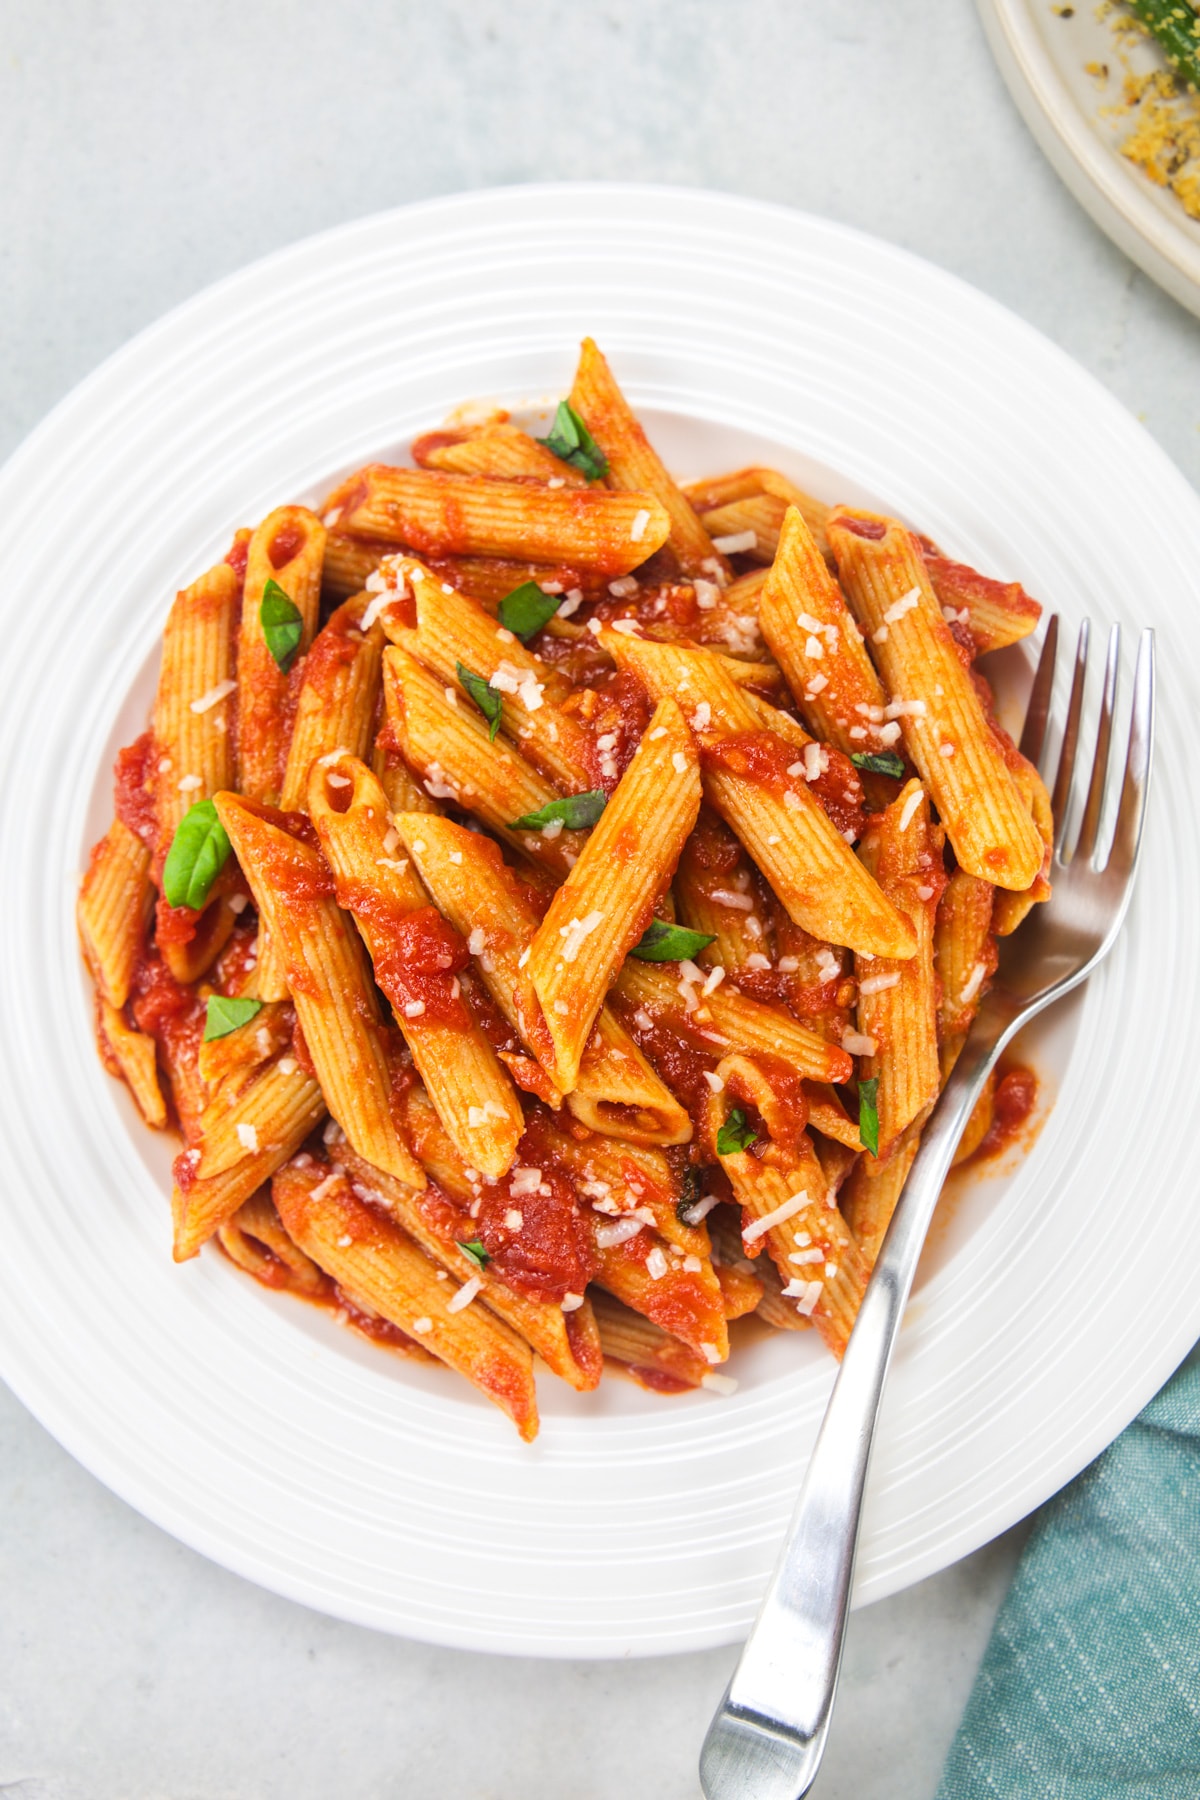 Penne pomodoro garnished with parmesan and basil.